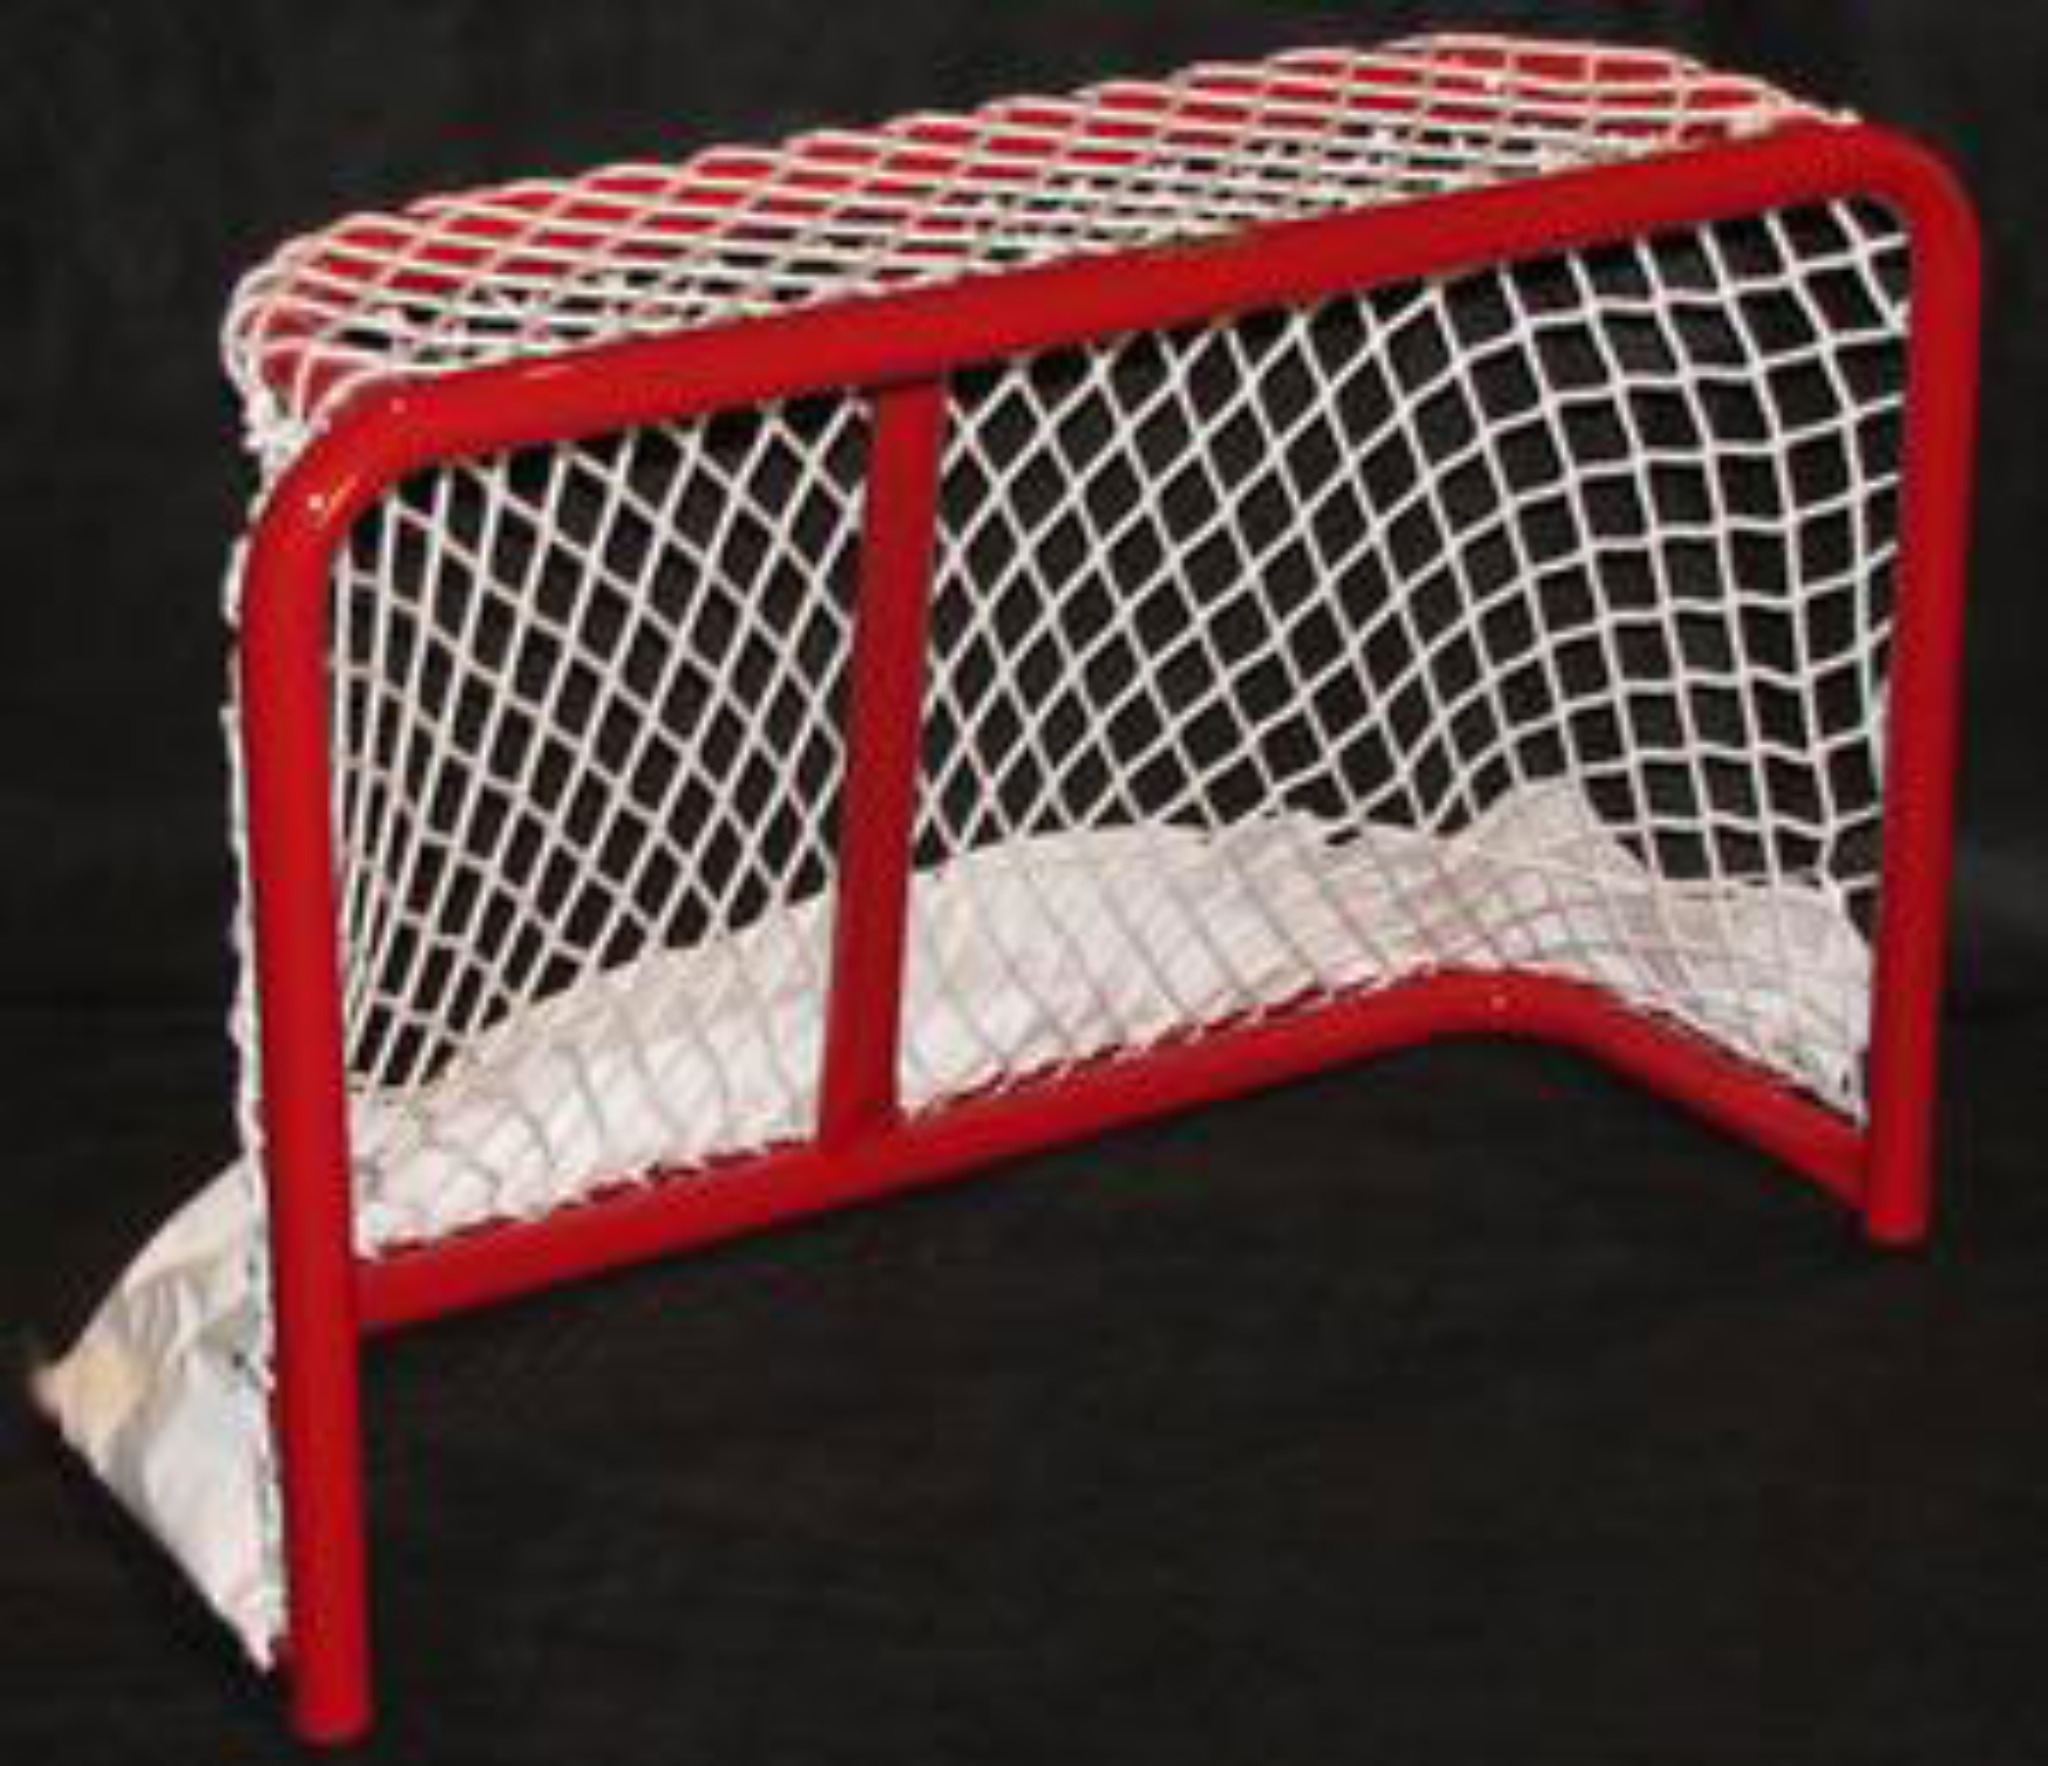 Steel Mini-Mite Hockey Goal, Made in the USA, with Welded Lacing Bar for Net Attachment. Age 6U Players with No Goalie. Size 3' x 2'.